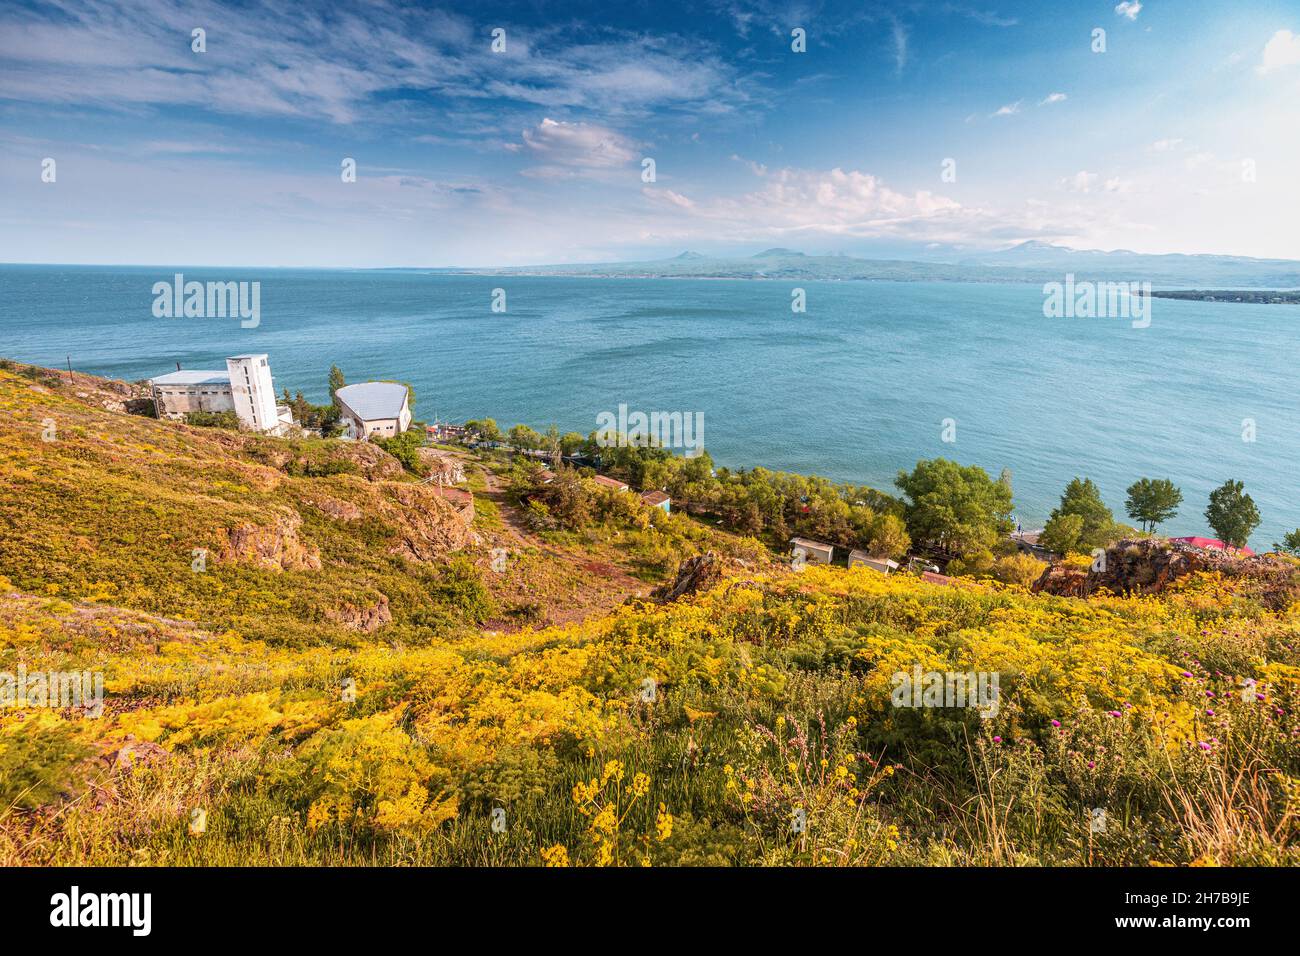 Dramatic landscape with hotel buildings on famous Lake Sevan. Natural travel destinations in Armenia Stock Photo